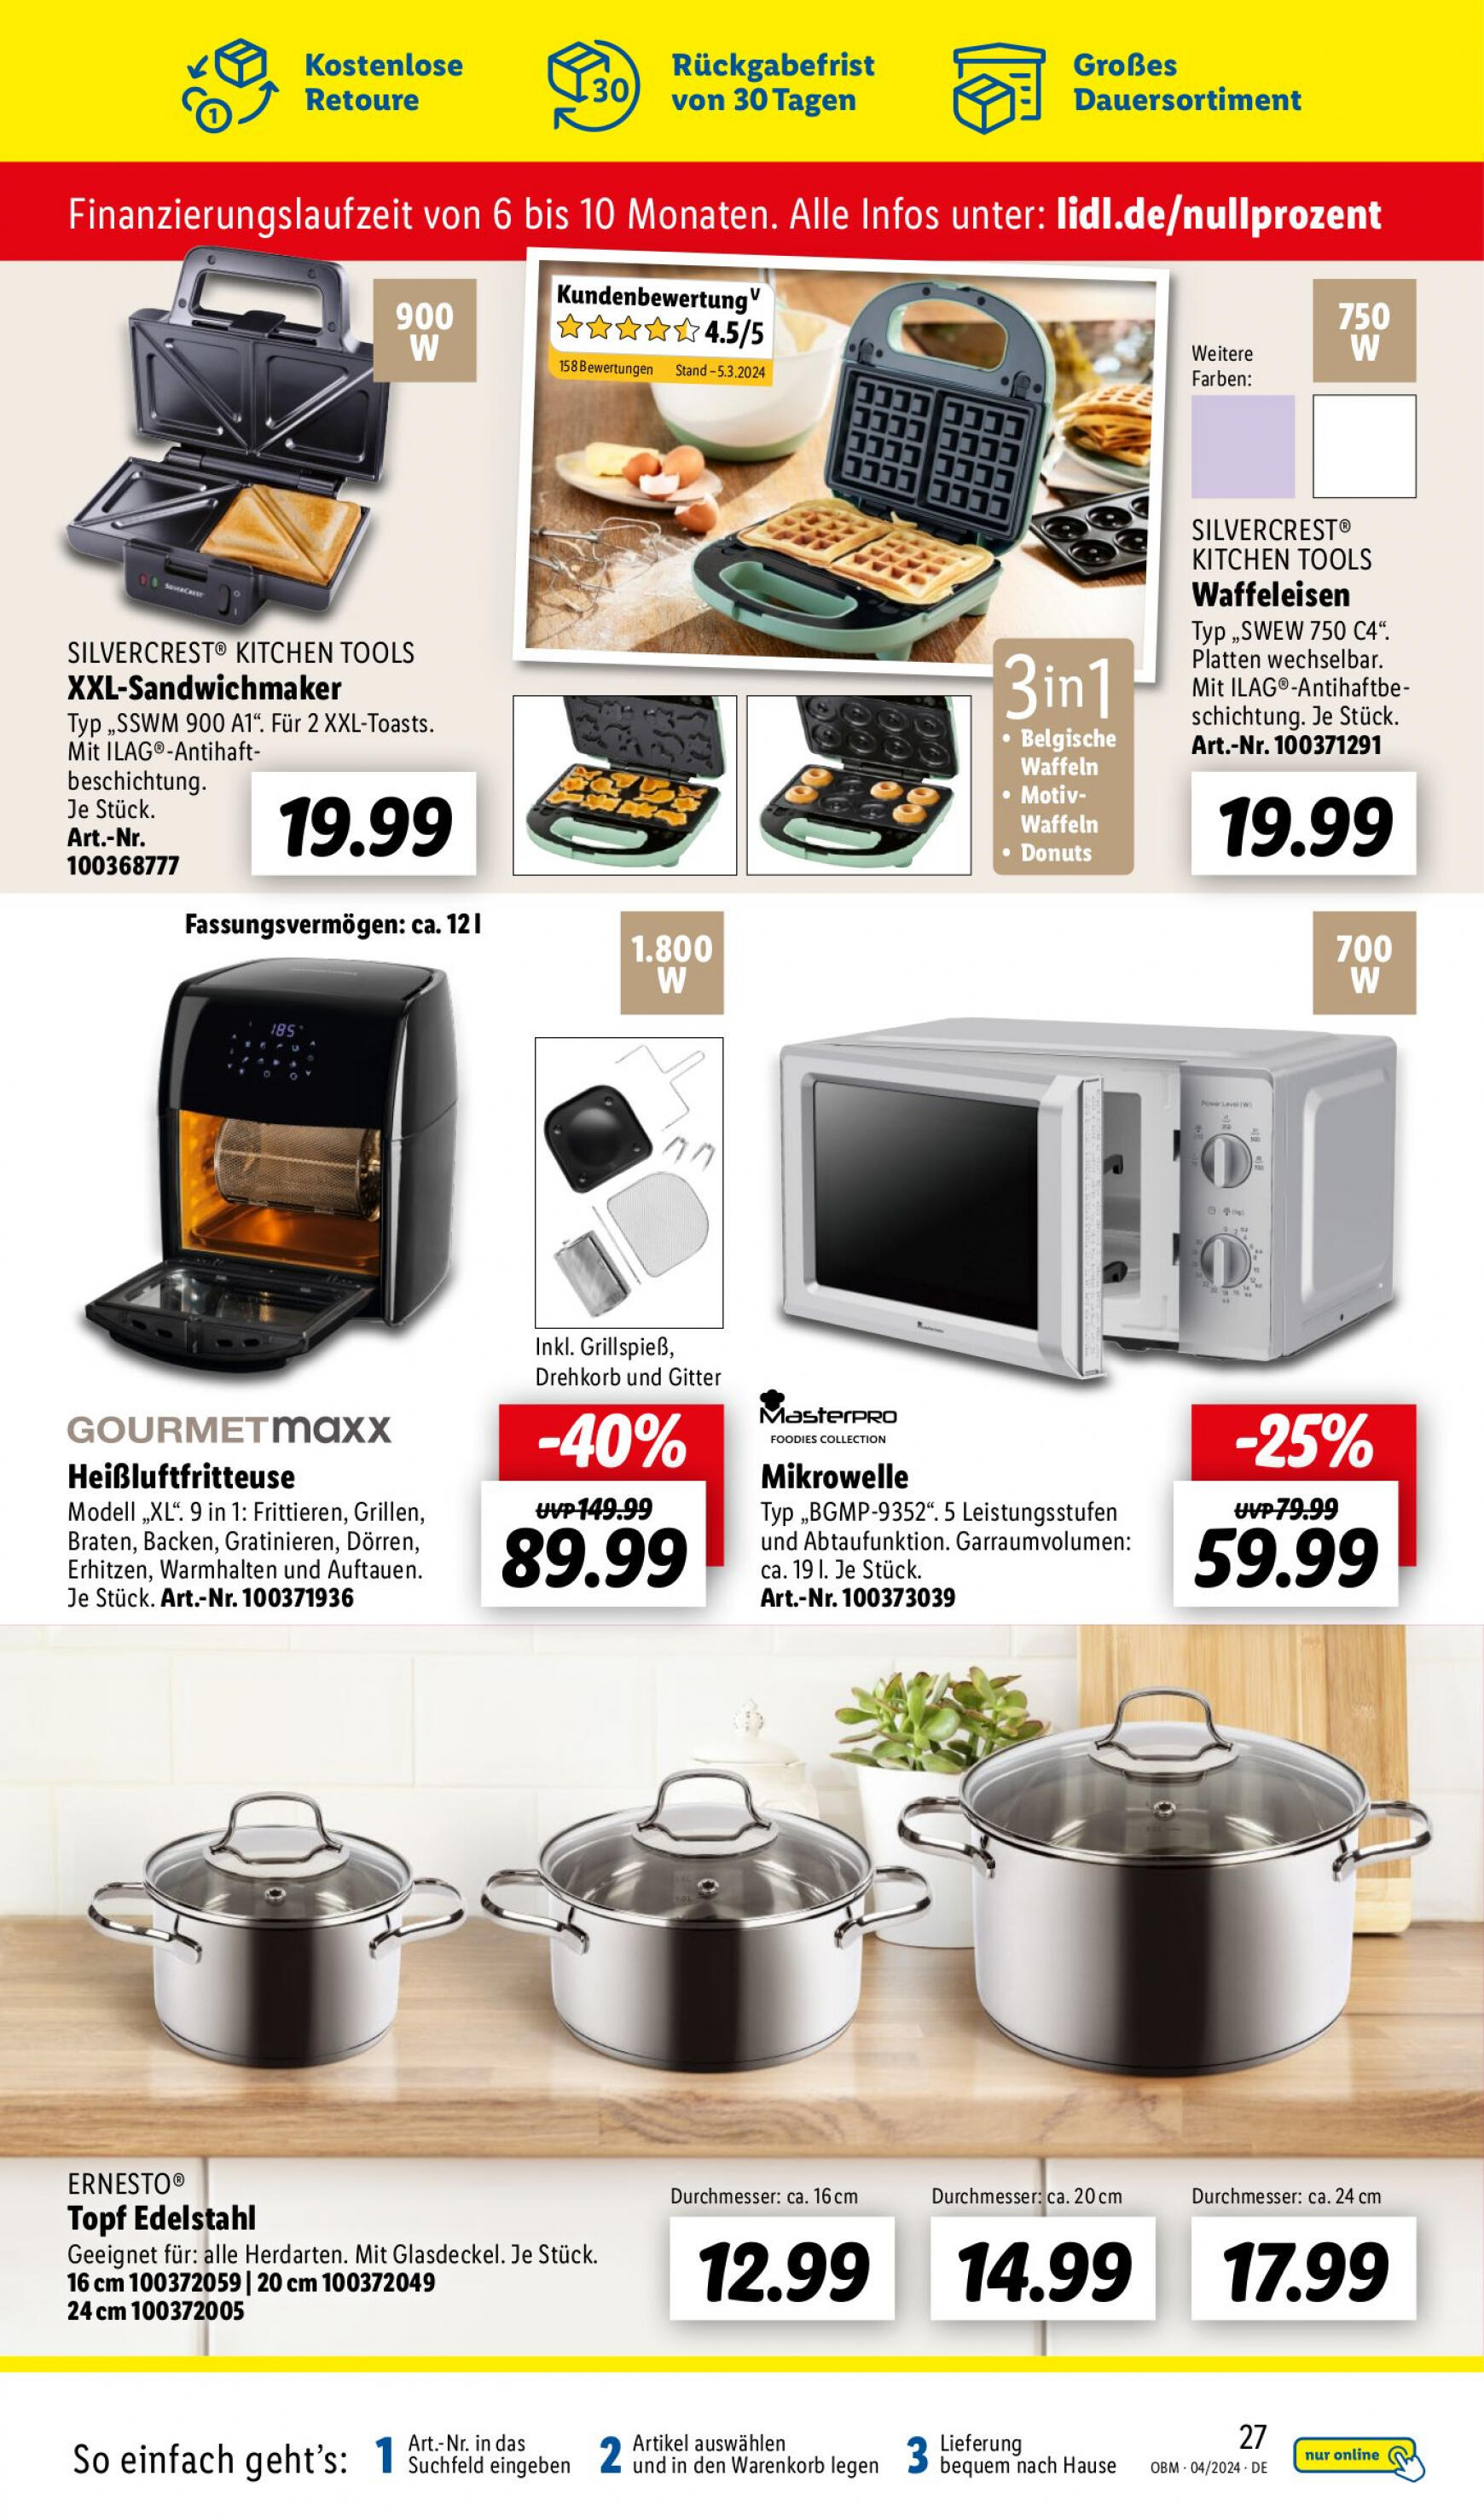 lidl - Flyer Lidl - Aktuelle Onlineshop-Highlights aktuell 01.04. - 30.04. - page: 27